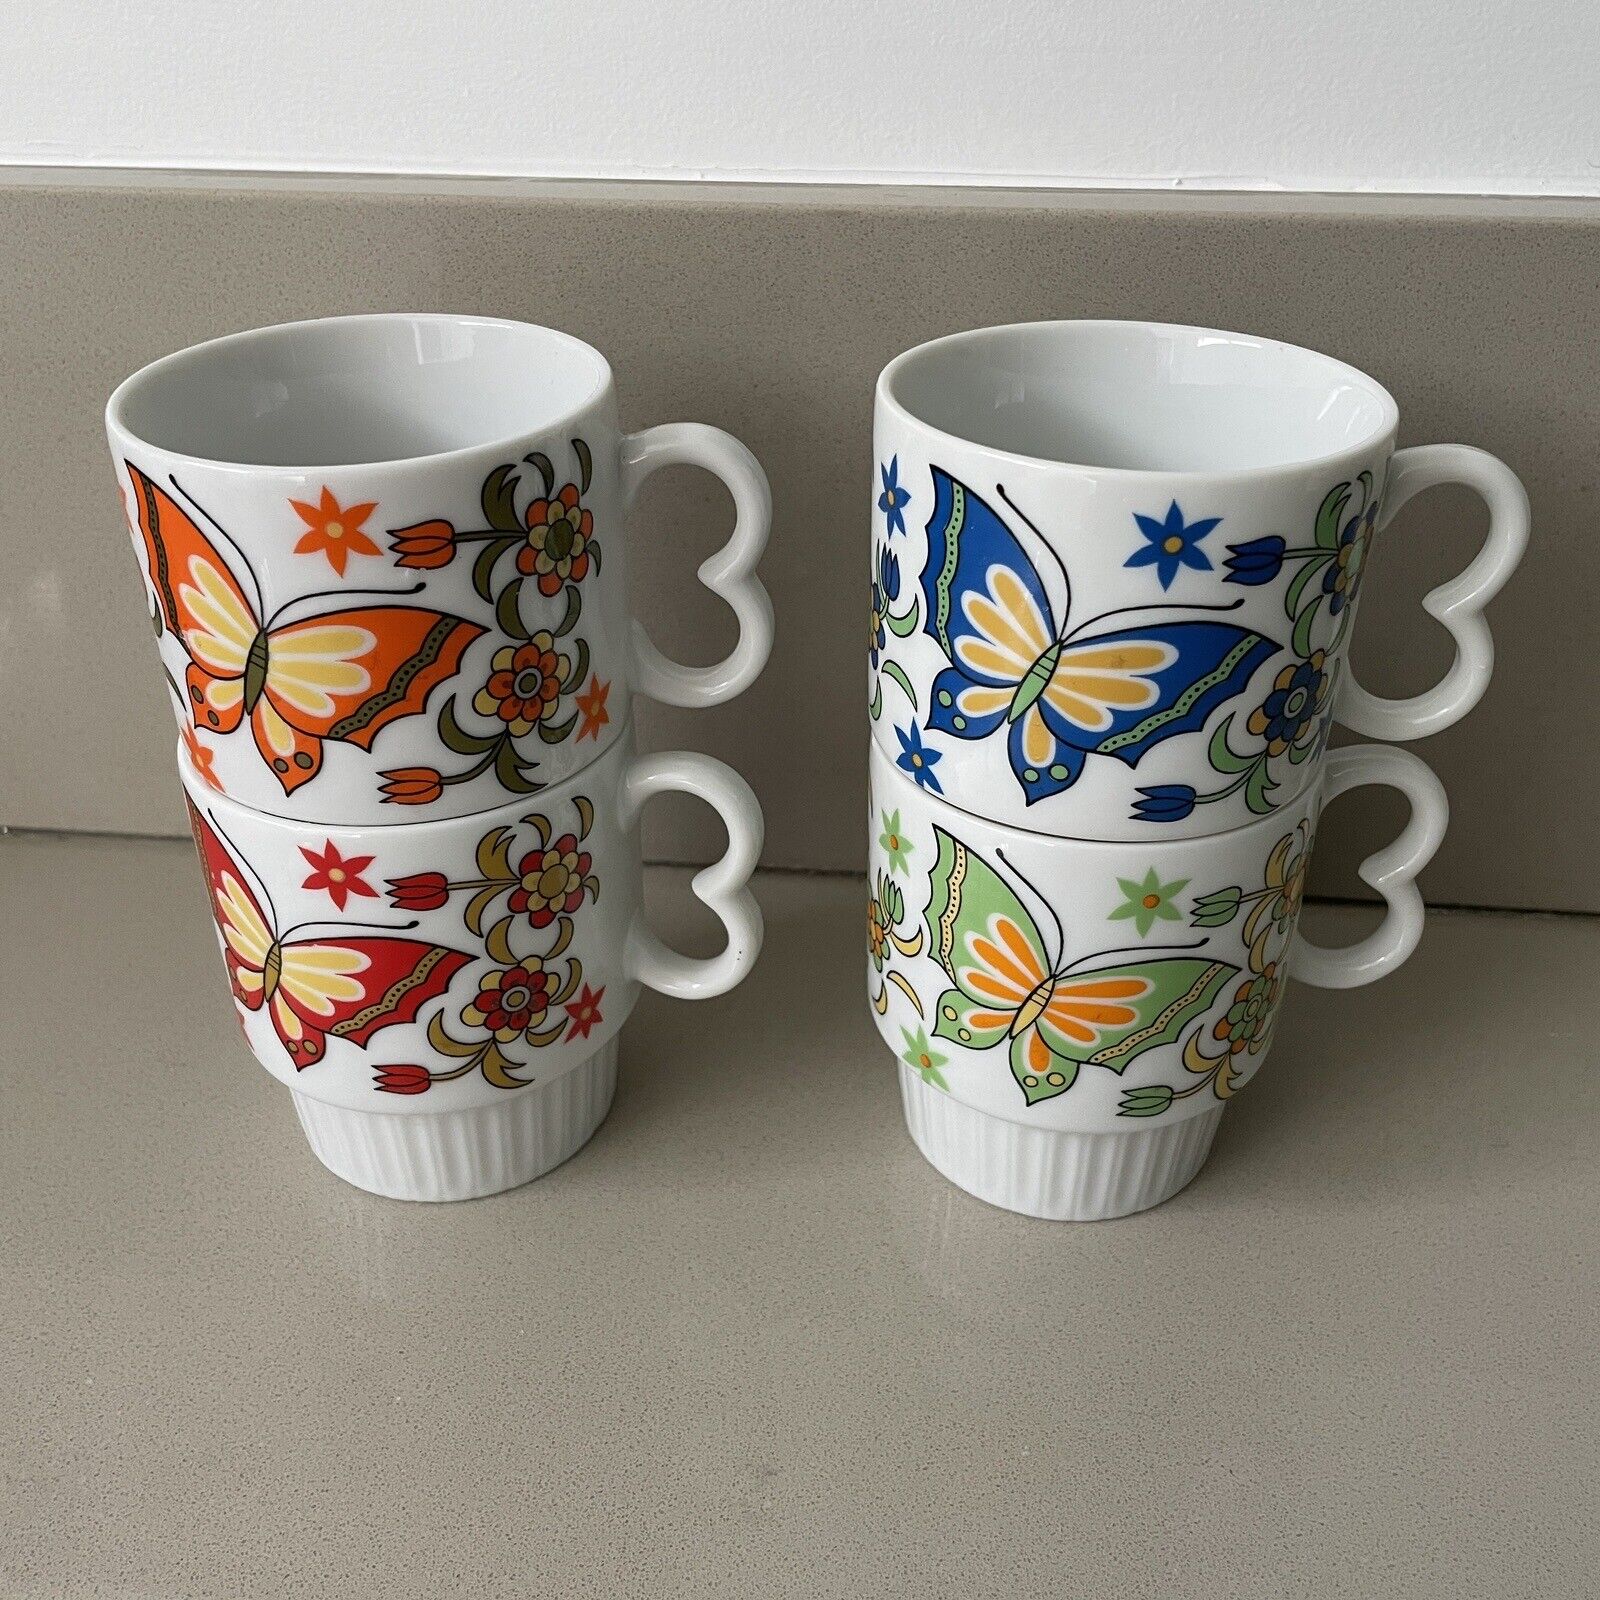 Vintage Butterfly Mugs Made In Japan Set Of 4 Retro Mod Stackable Coffee Tea